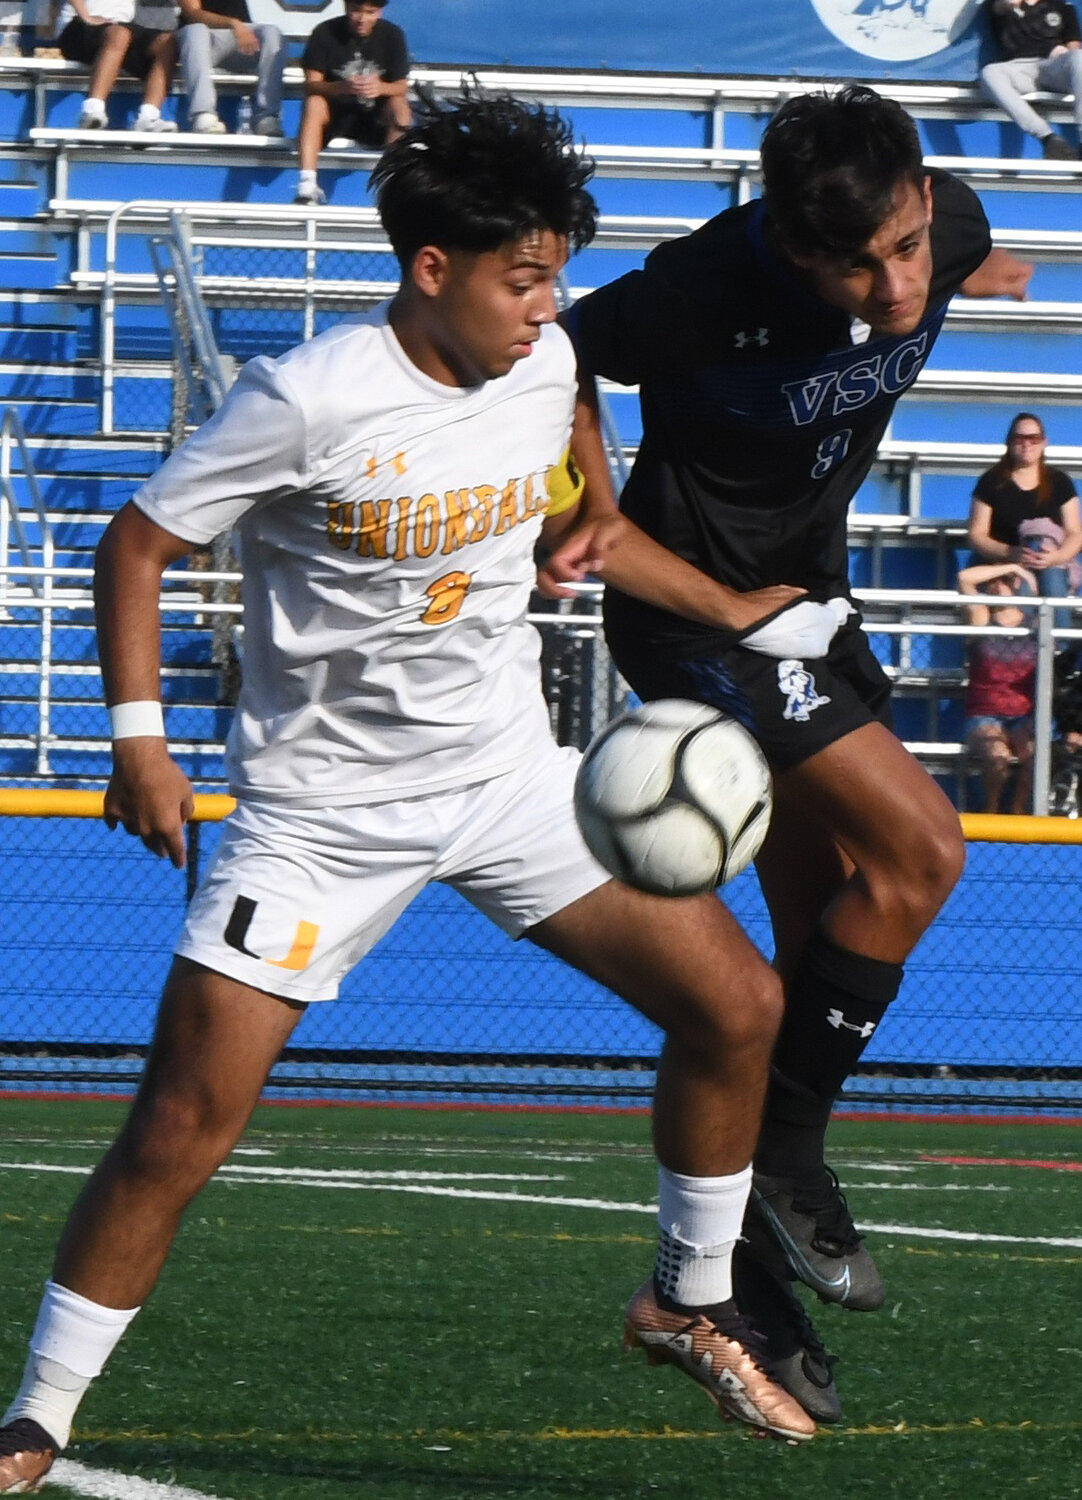 Senior captain and midfielder Fernando Rios, left, is the heart and soul of a Knights’ team eager to make a deep playoff run this fall.